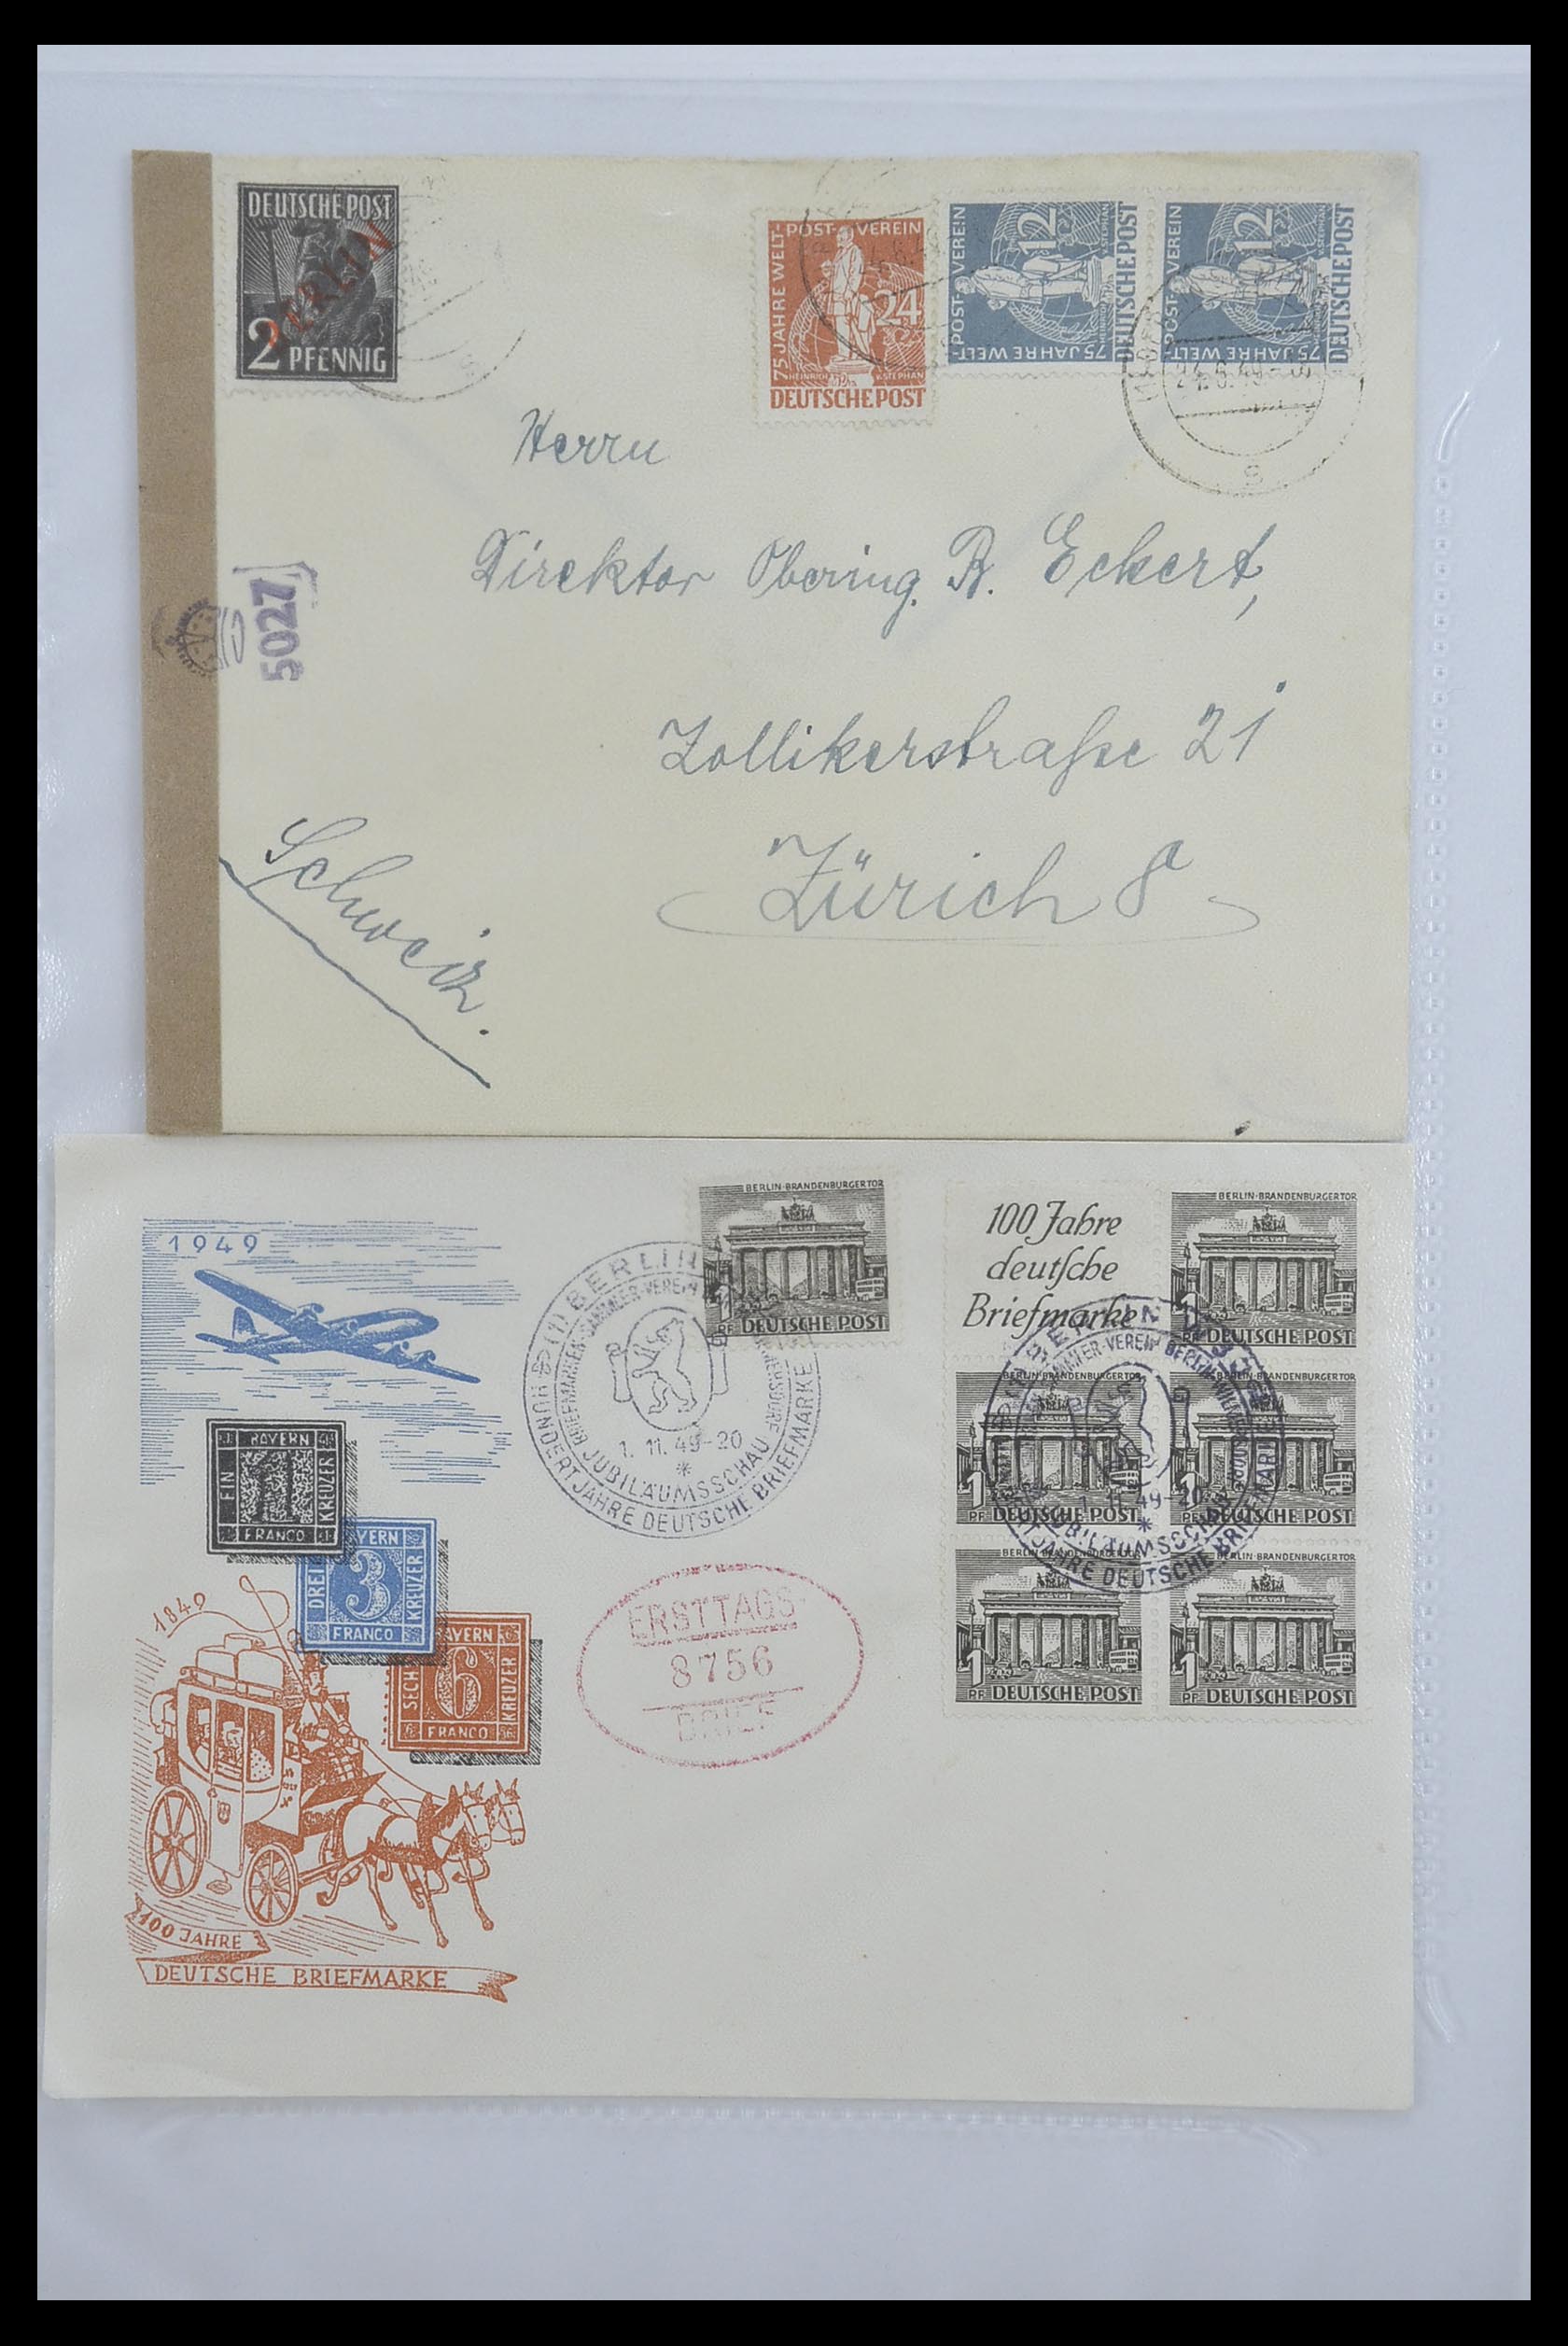 33290 015 - Stamp collection 33290 Berlin covers 1948-1957.